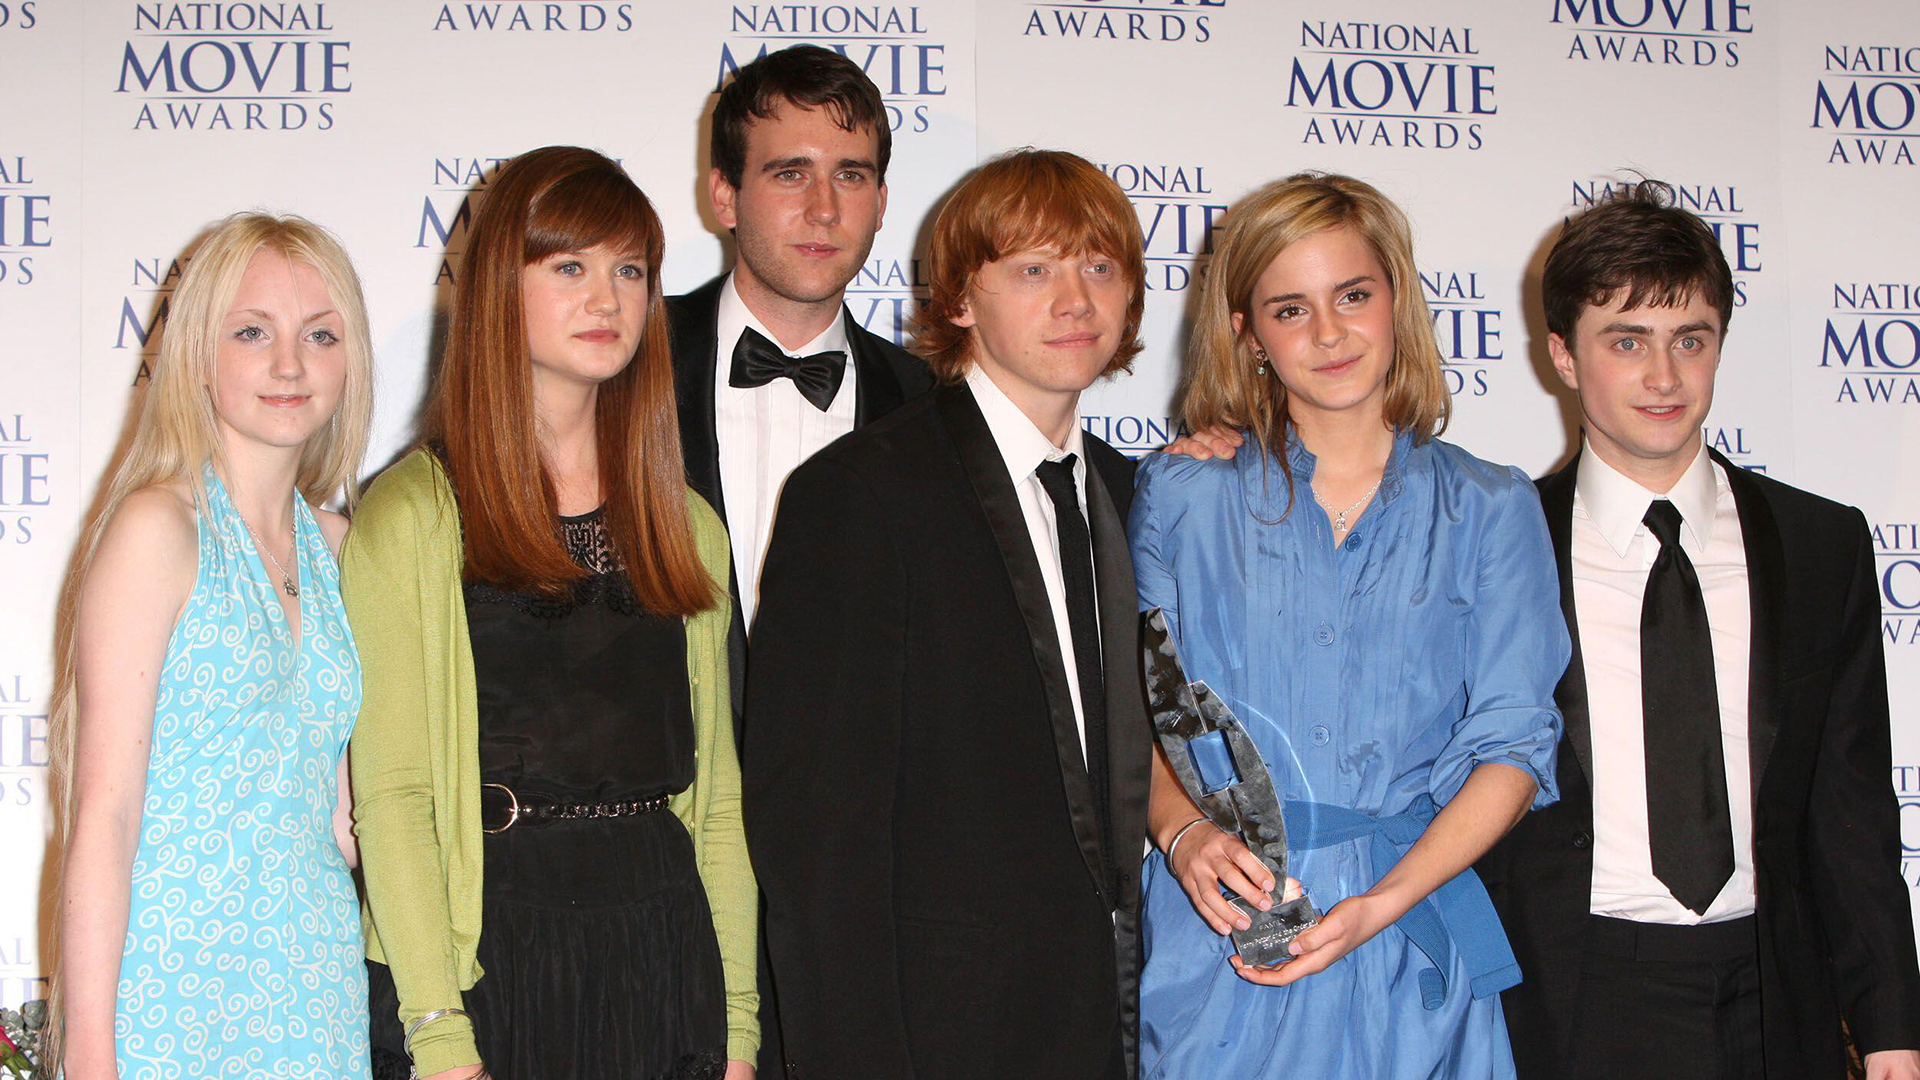 20 Years On: Here's What The Cast of Harry Potter Look Like Now